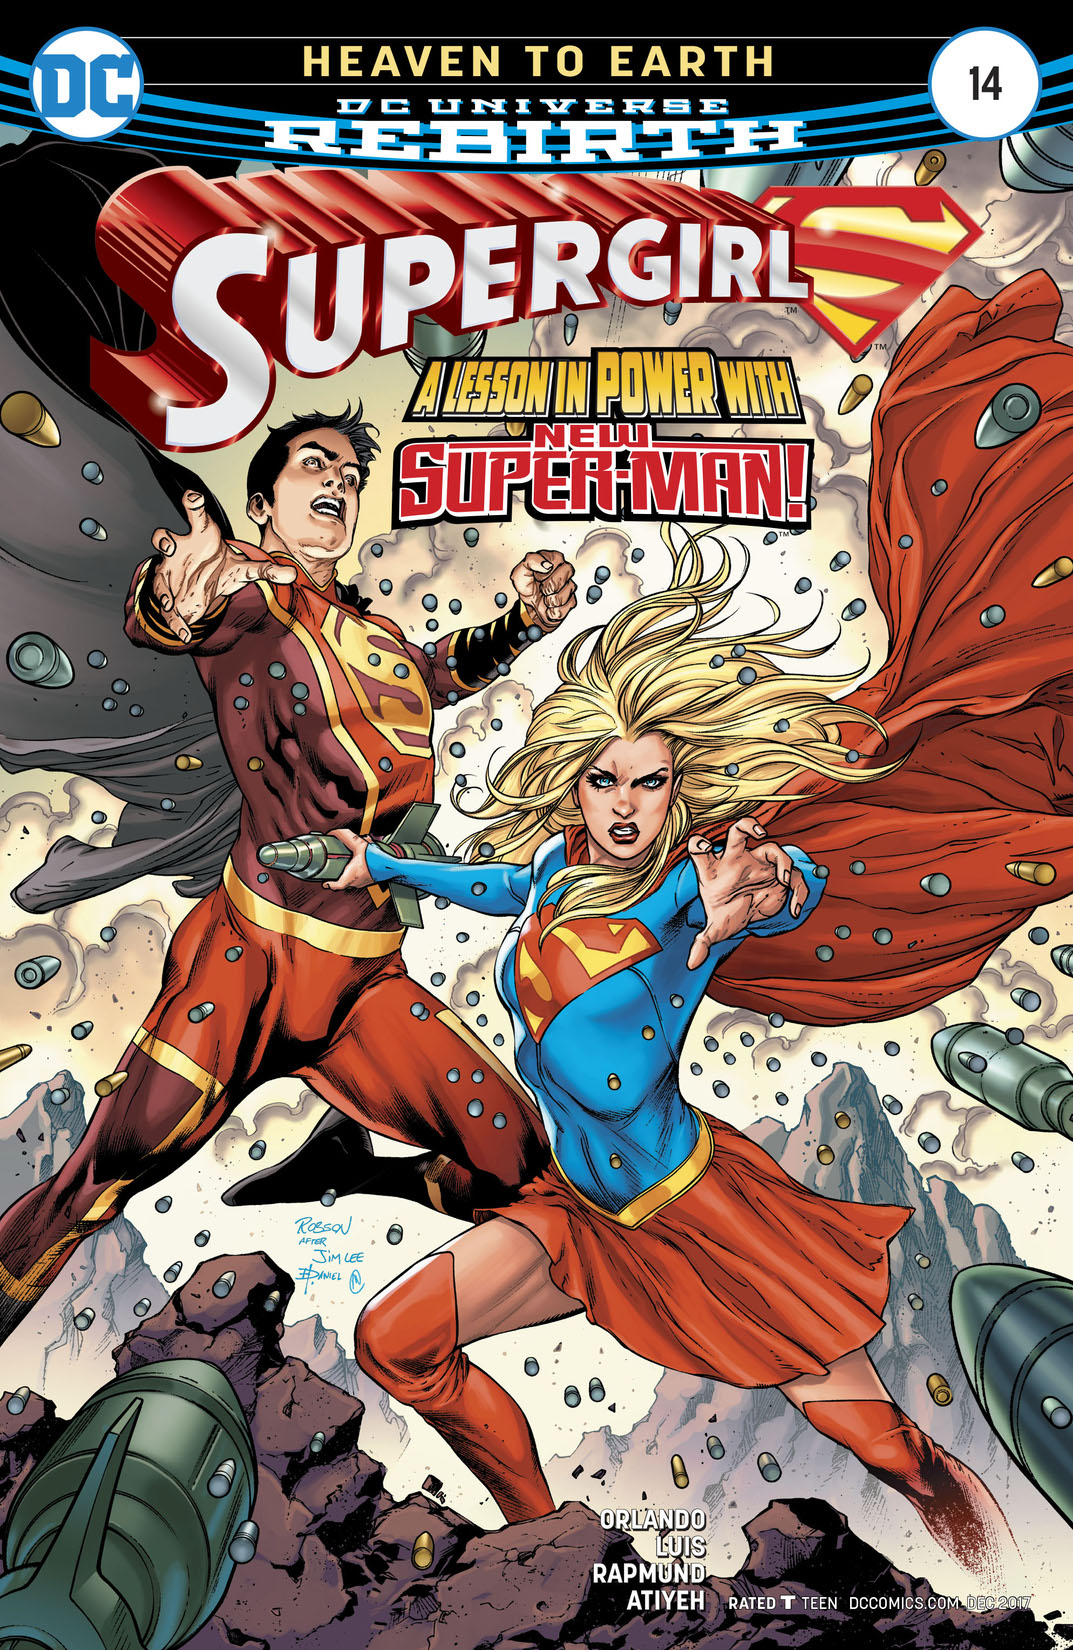 Supergirl (2016-) #14 preview images